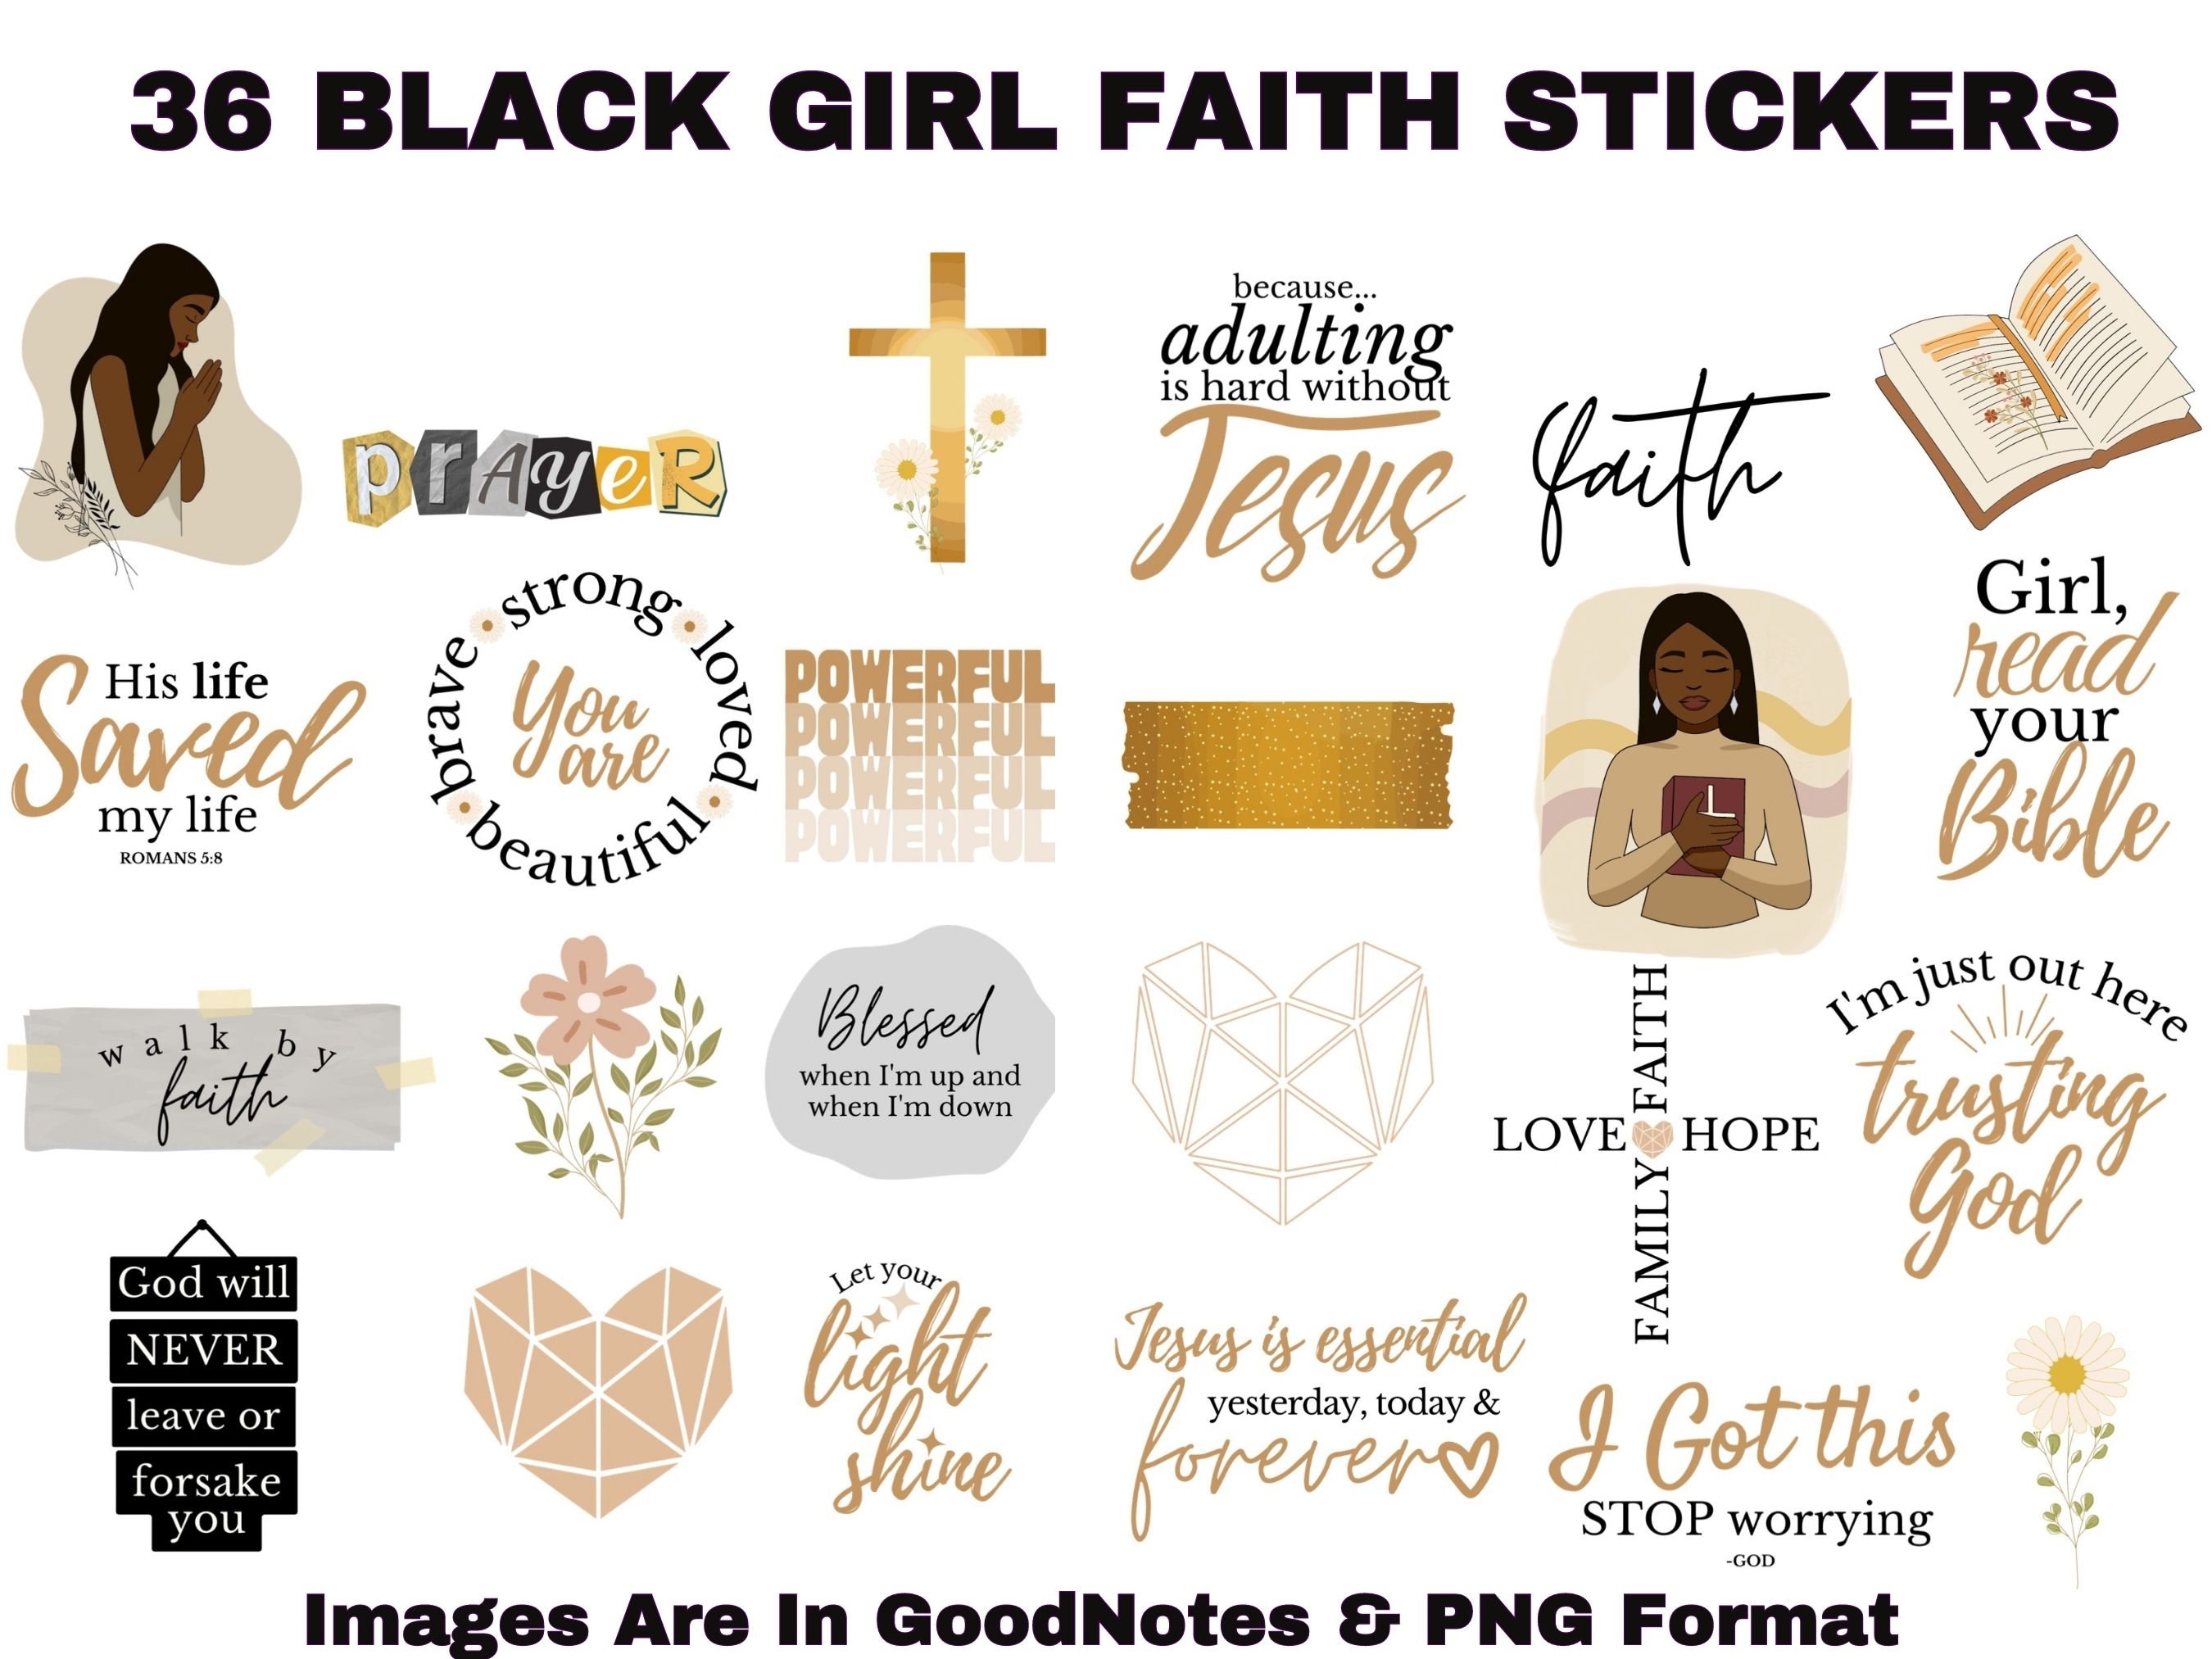 Black History Month Stickers Faith Christian Stickers Bible Stickers  Affirmation Stickers Black Women Stickers Melanin Youth Ministry Decal 